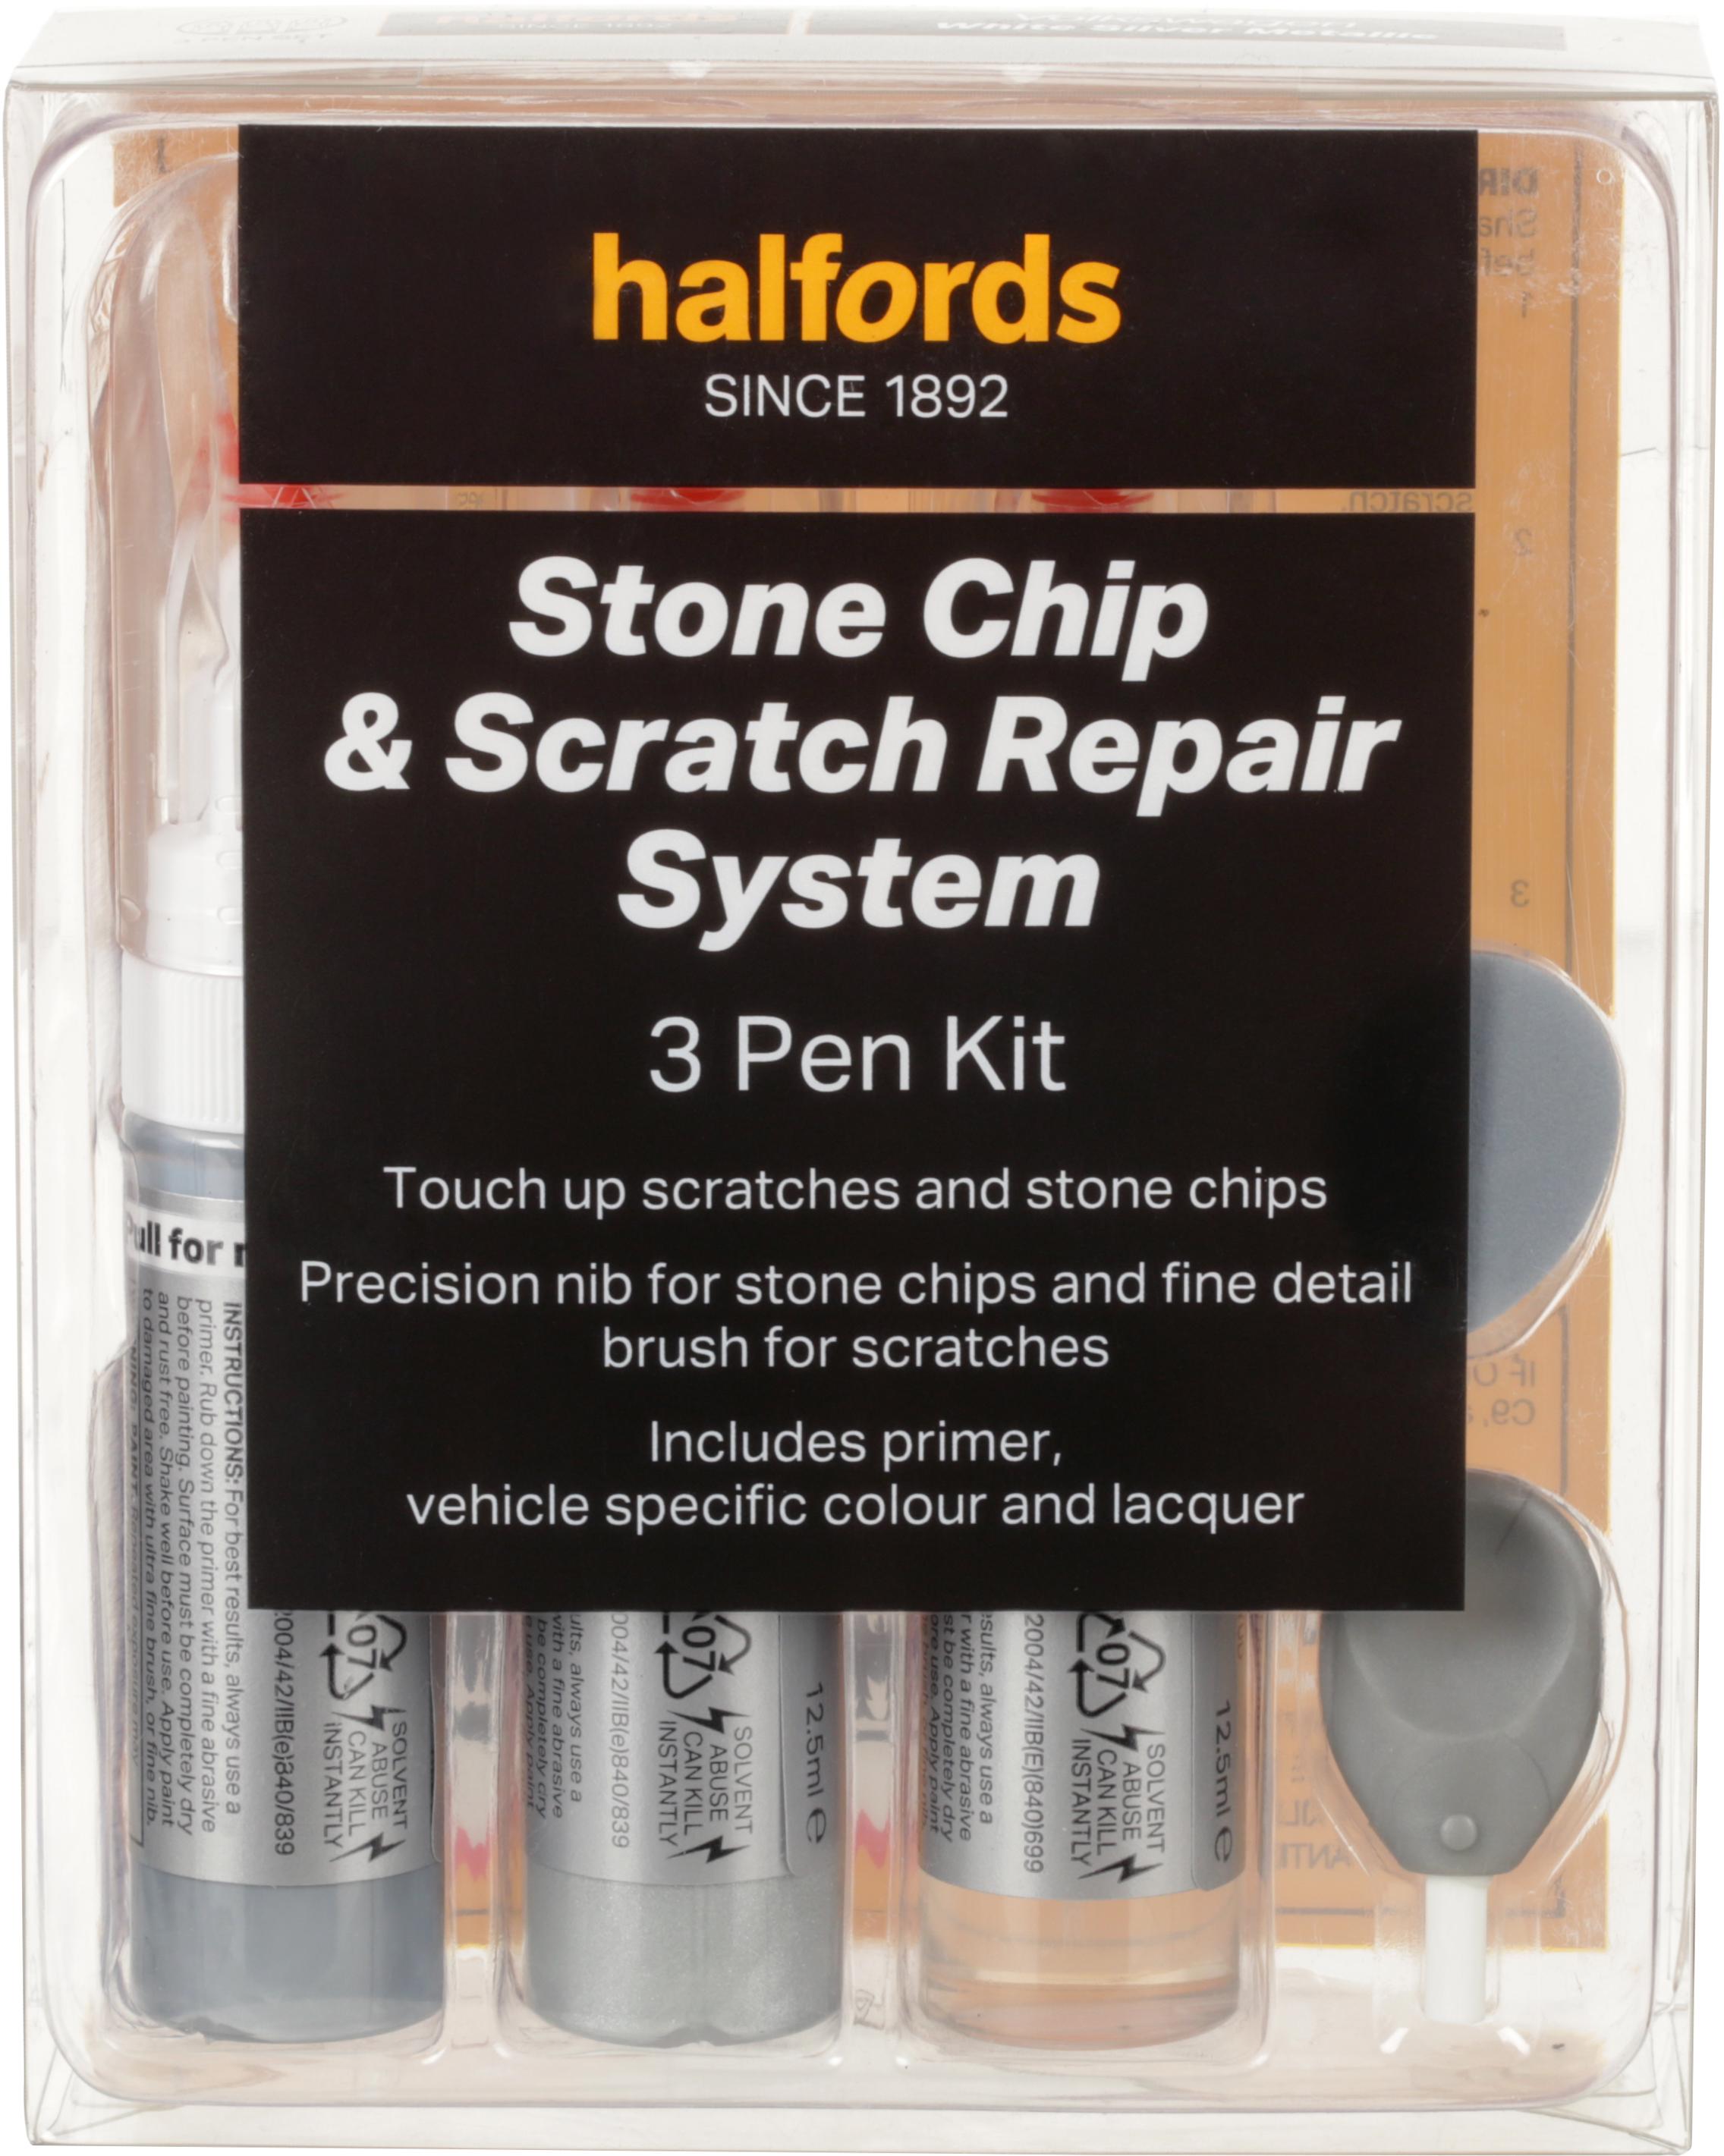 Halfords Vw White Silver Scratch & Chip Repair Kit